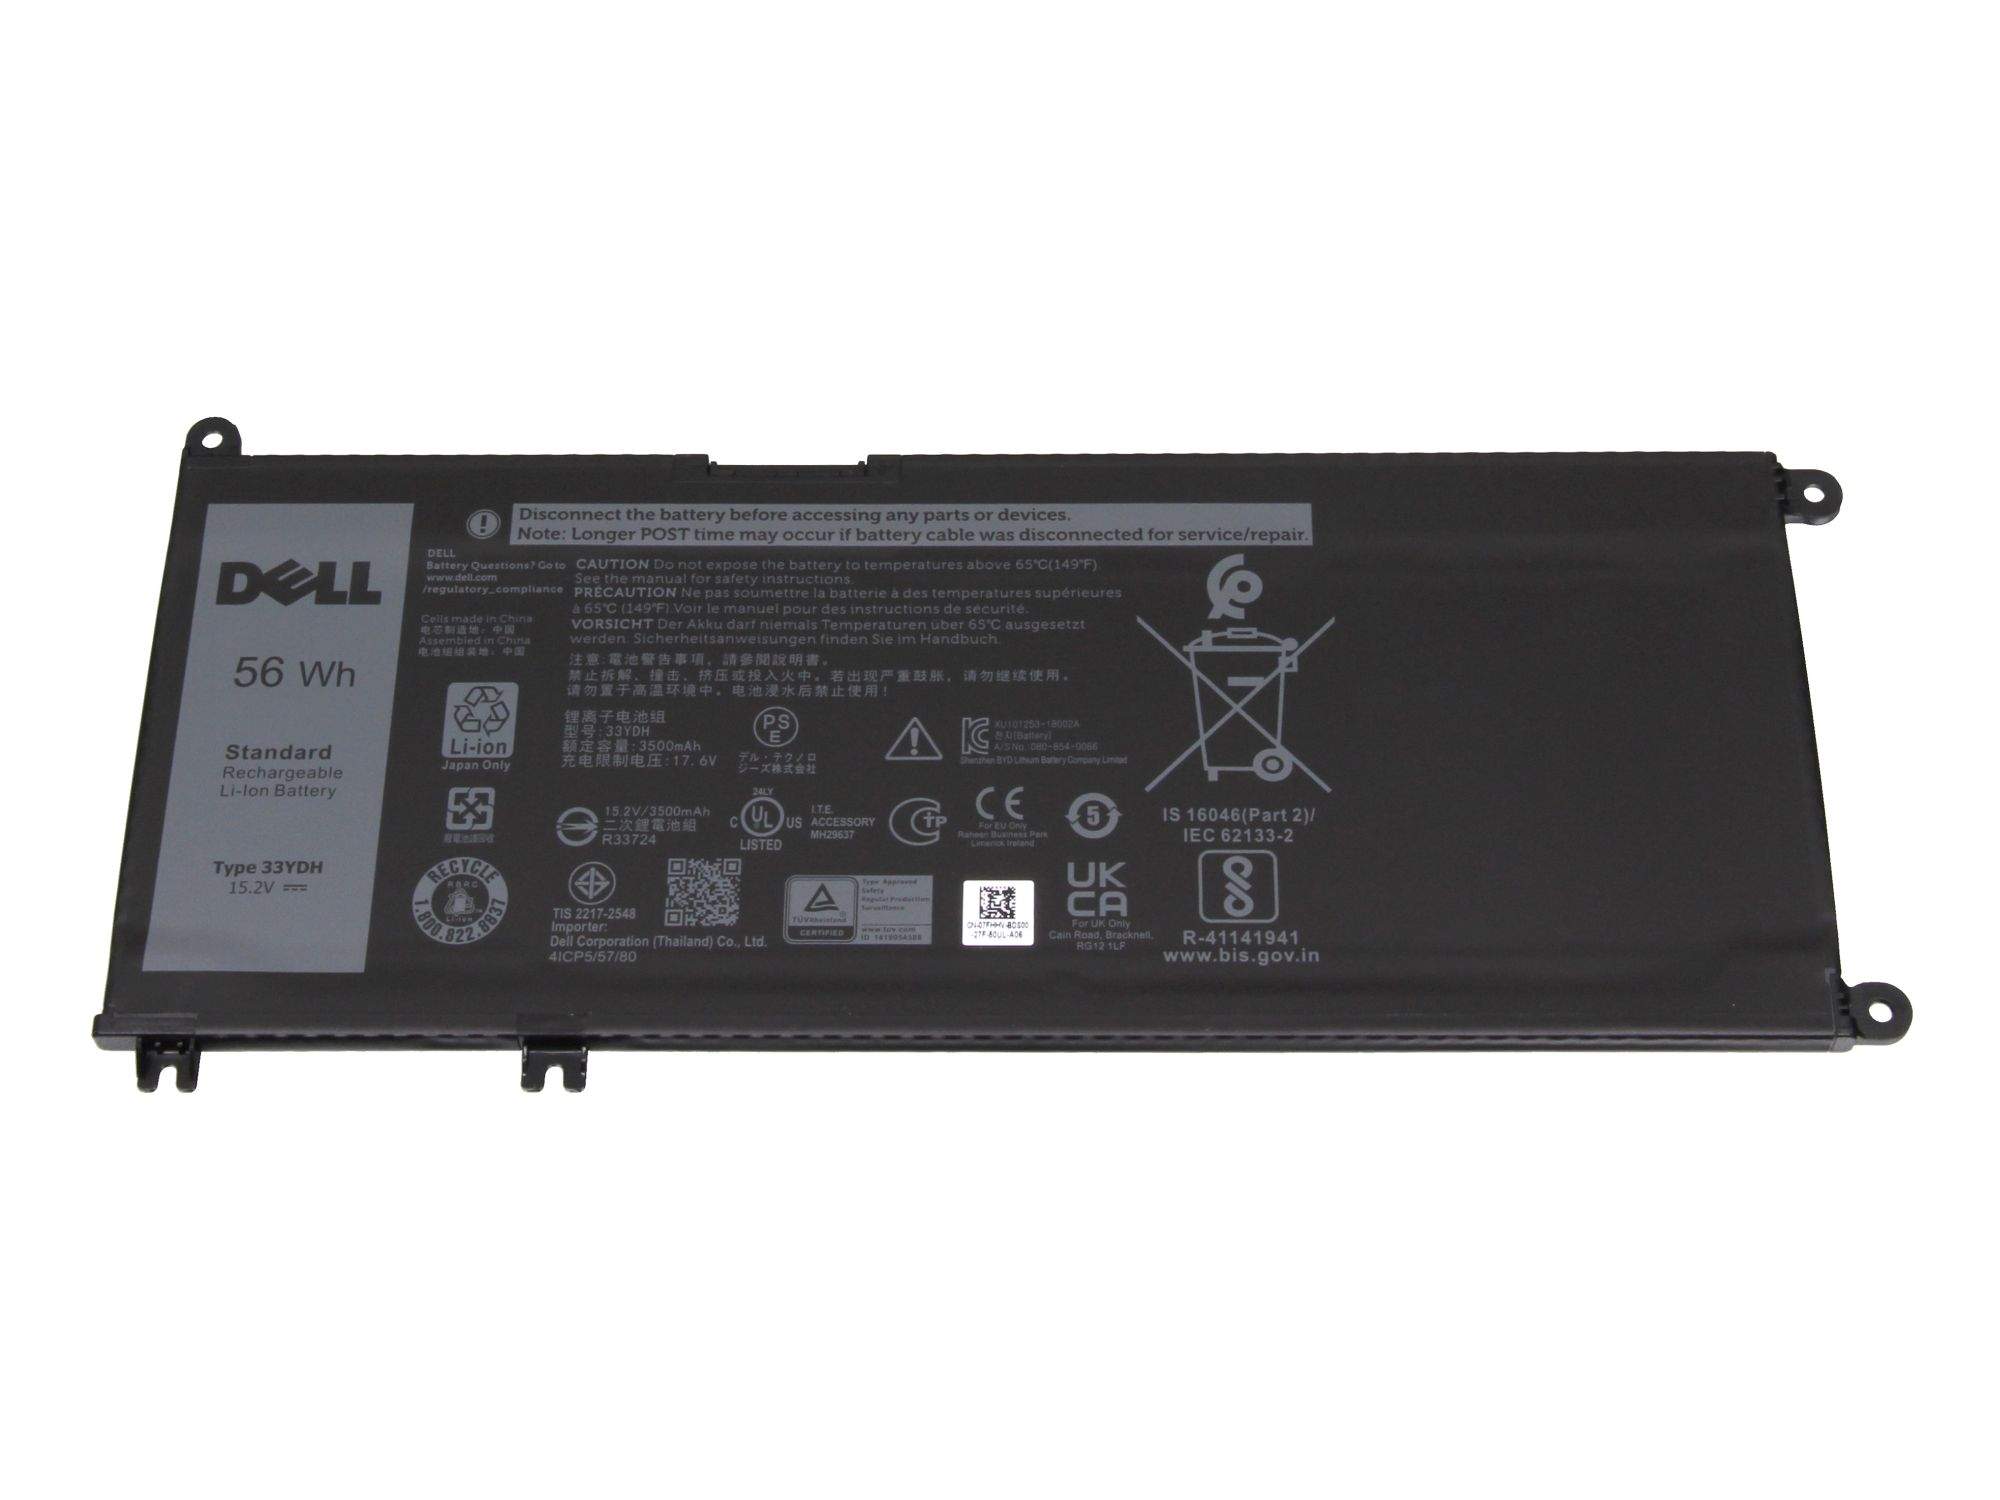 DELL Battery 56WHR 4 Cell Lithium